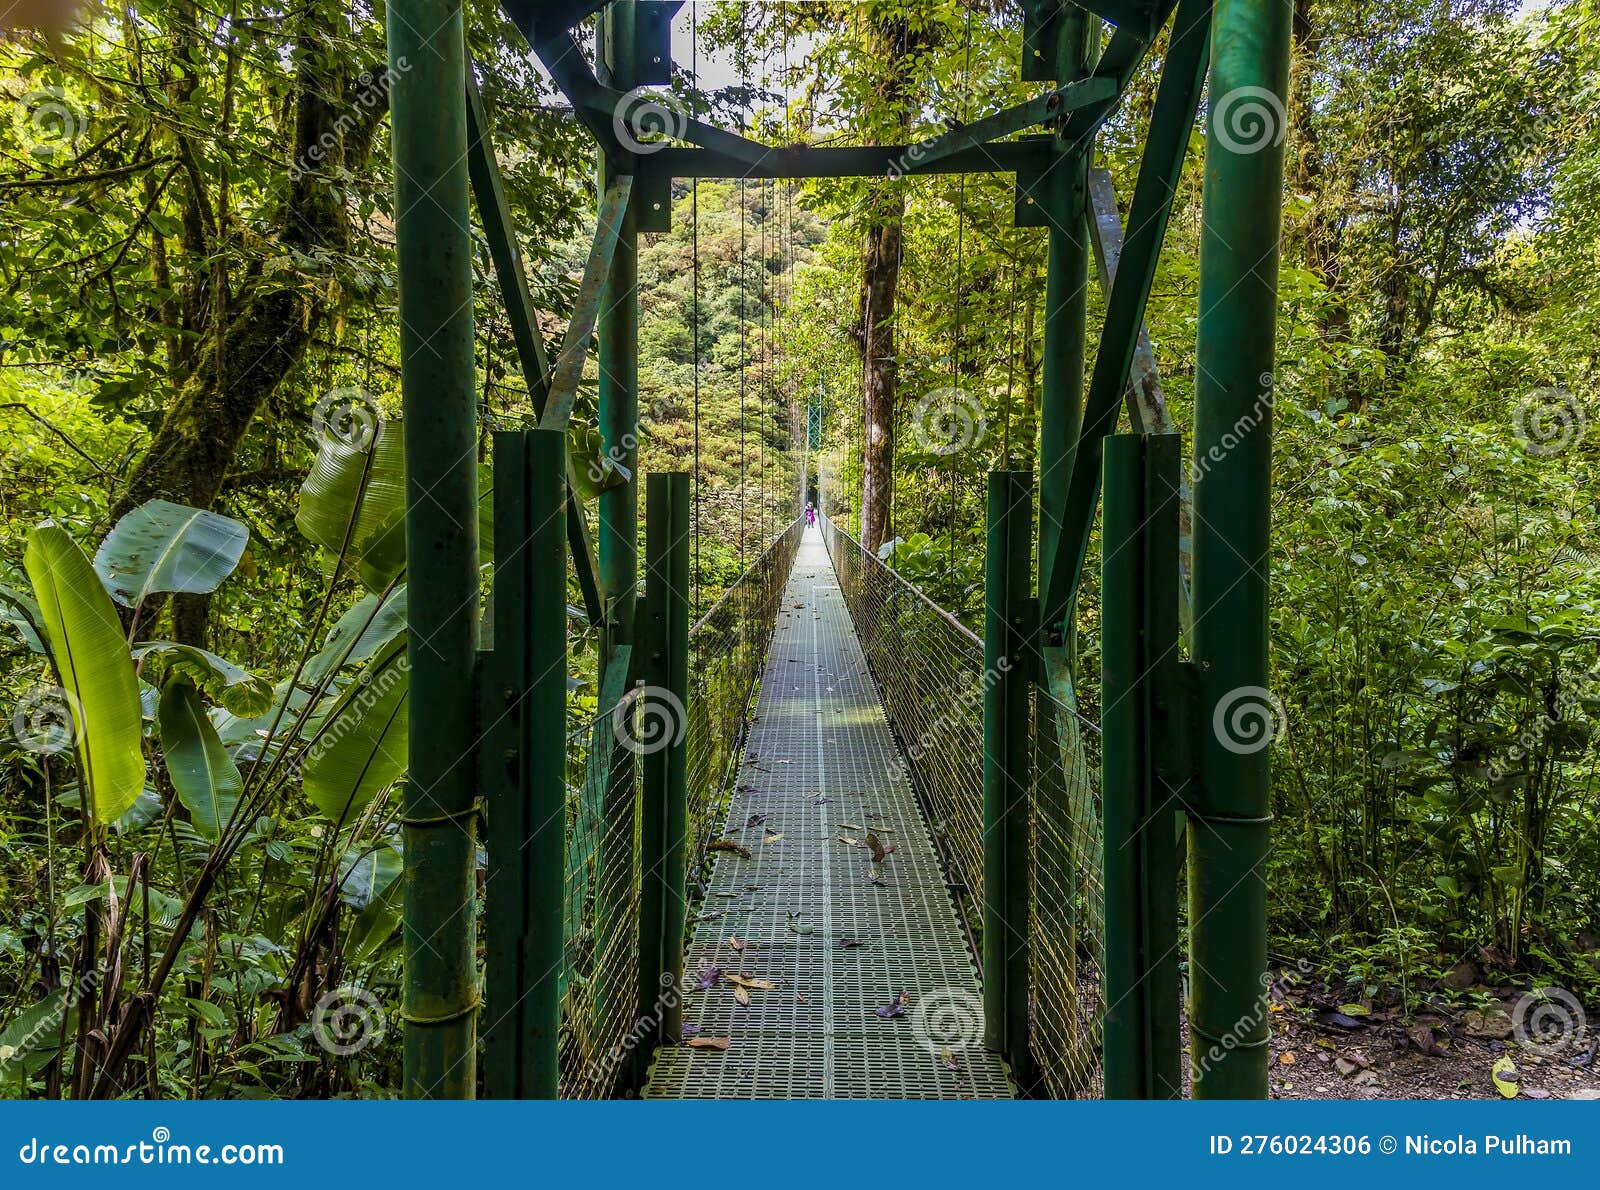 a view from the entrance to a 100m long suspended bridge in the cloud rain forest in monteverde, costa rica